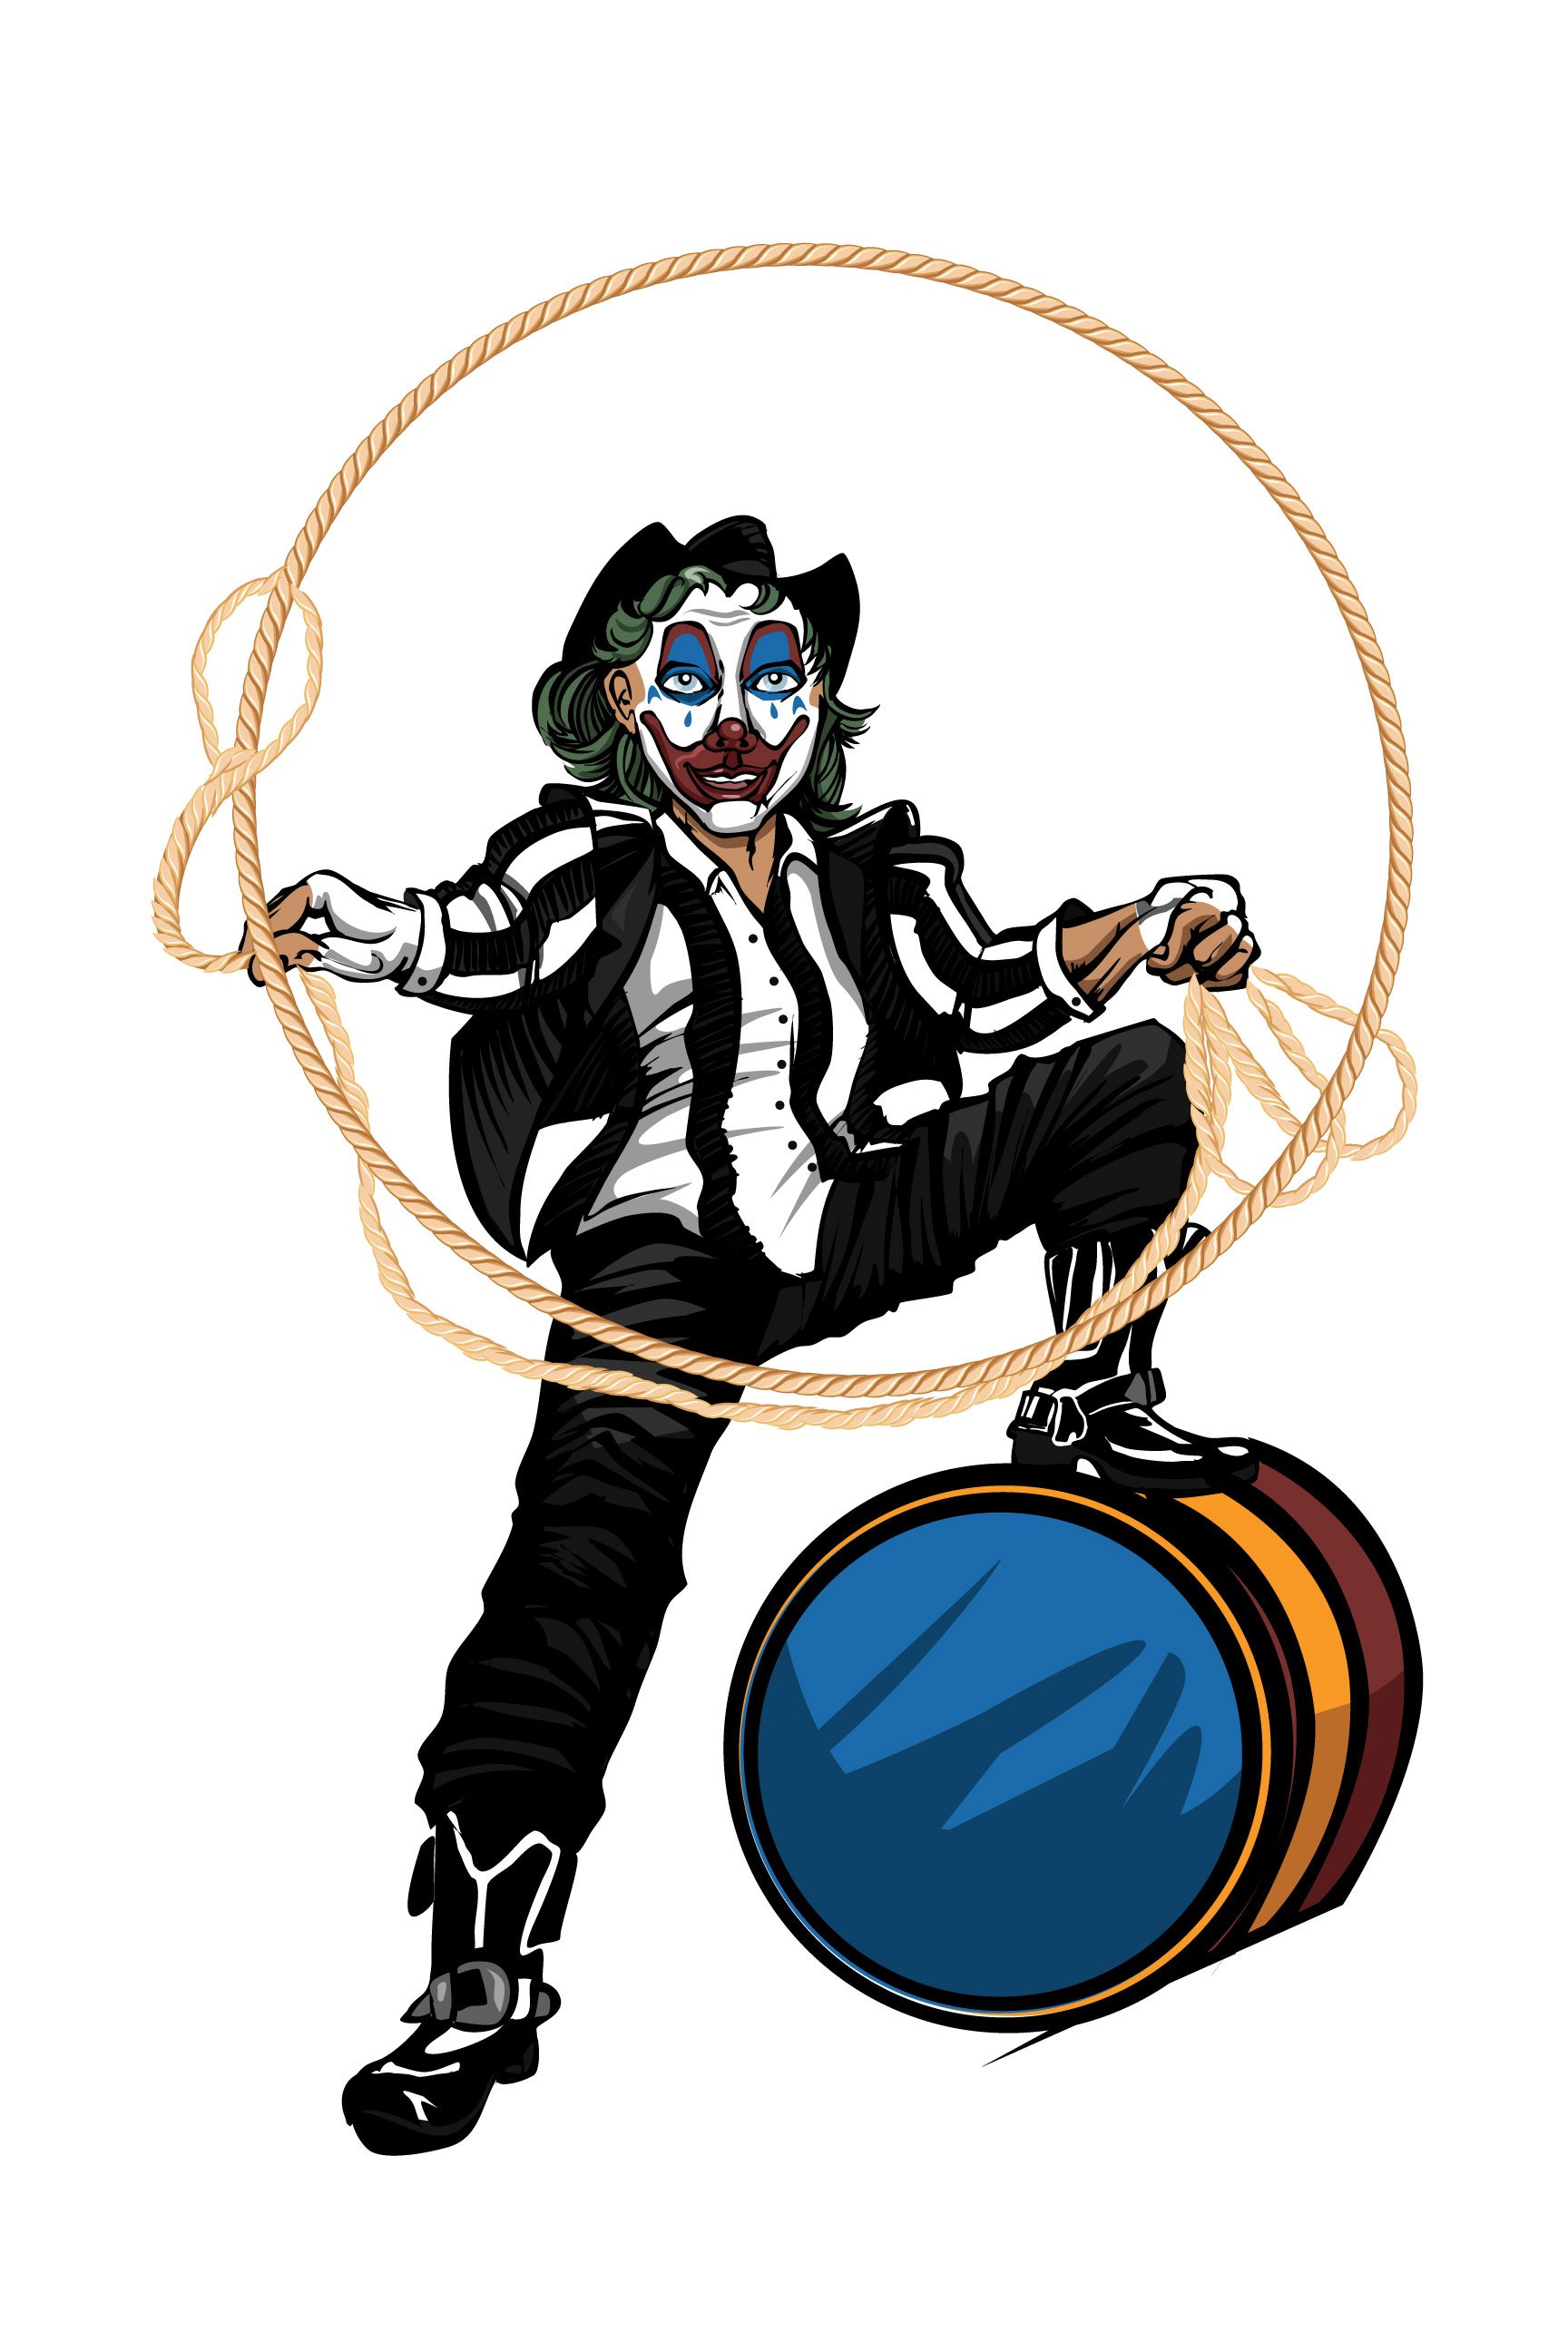 RR_Nice_Joseph_Clown_Outline_and_Color_CompA_v001_LAYERED.jpg